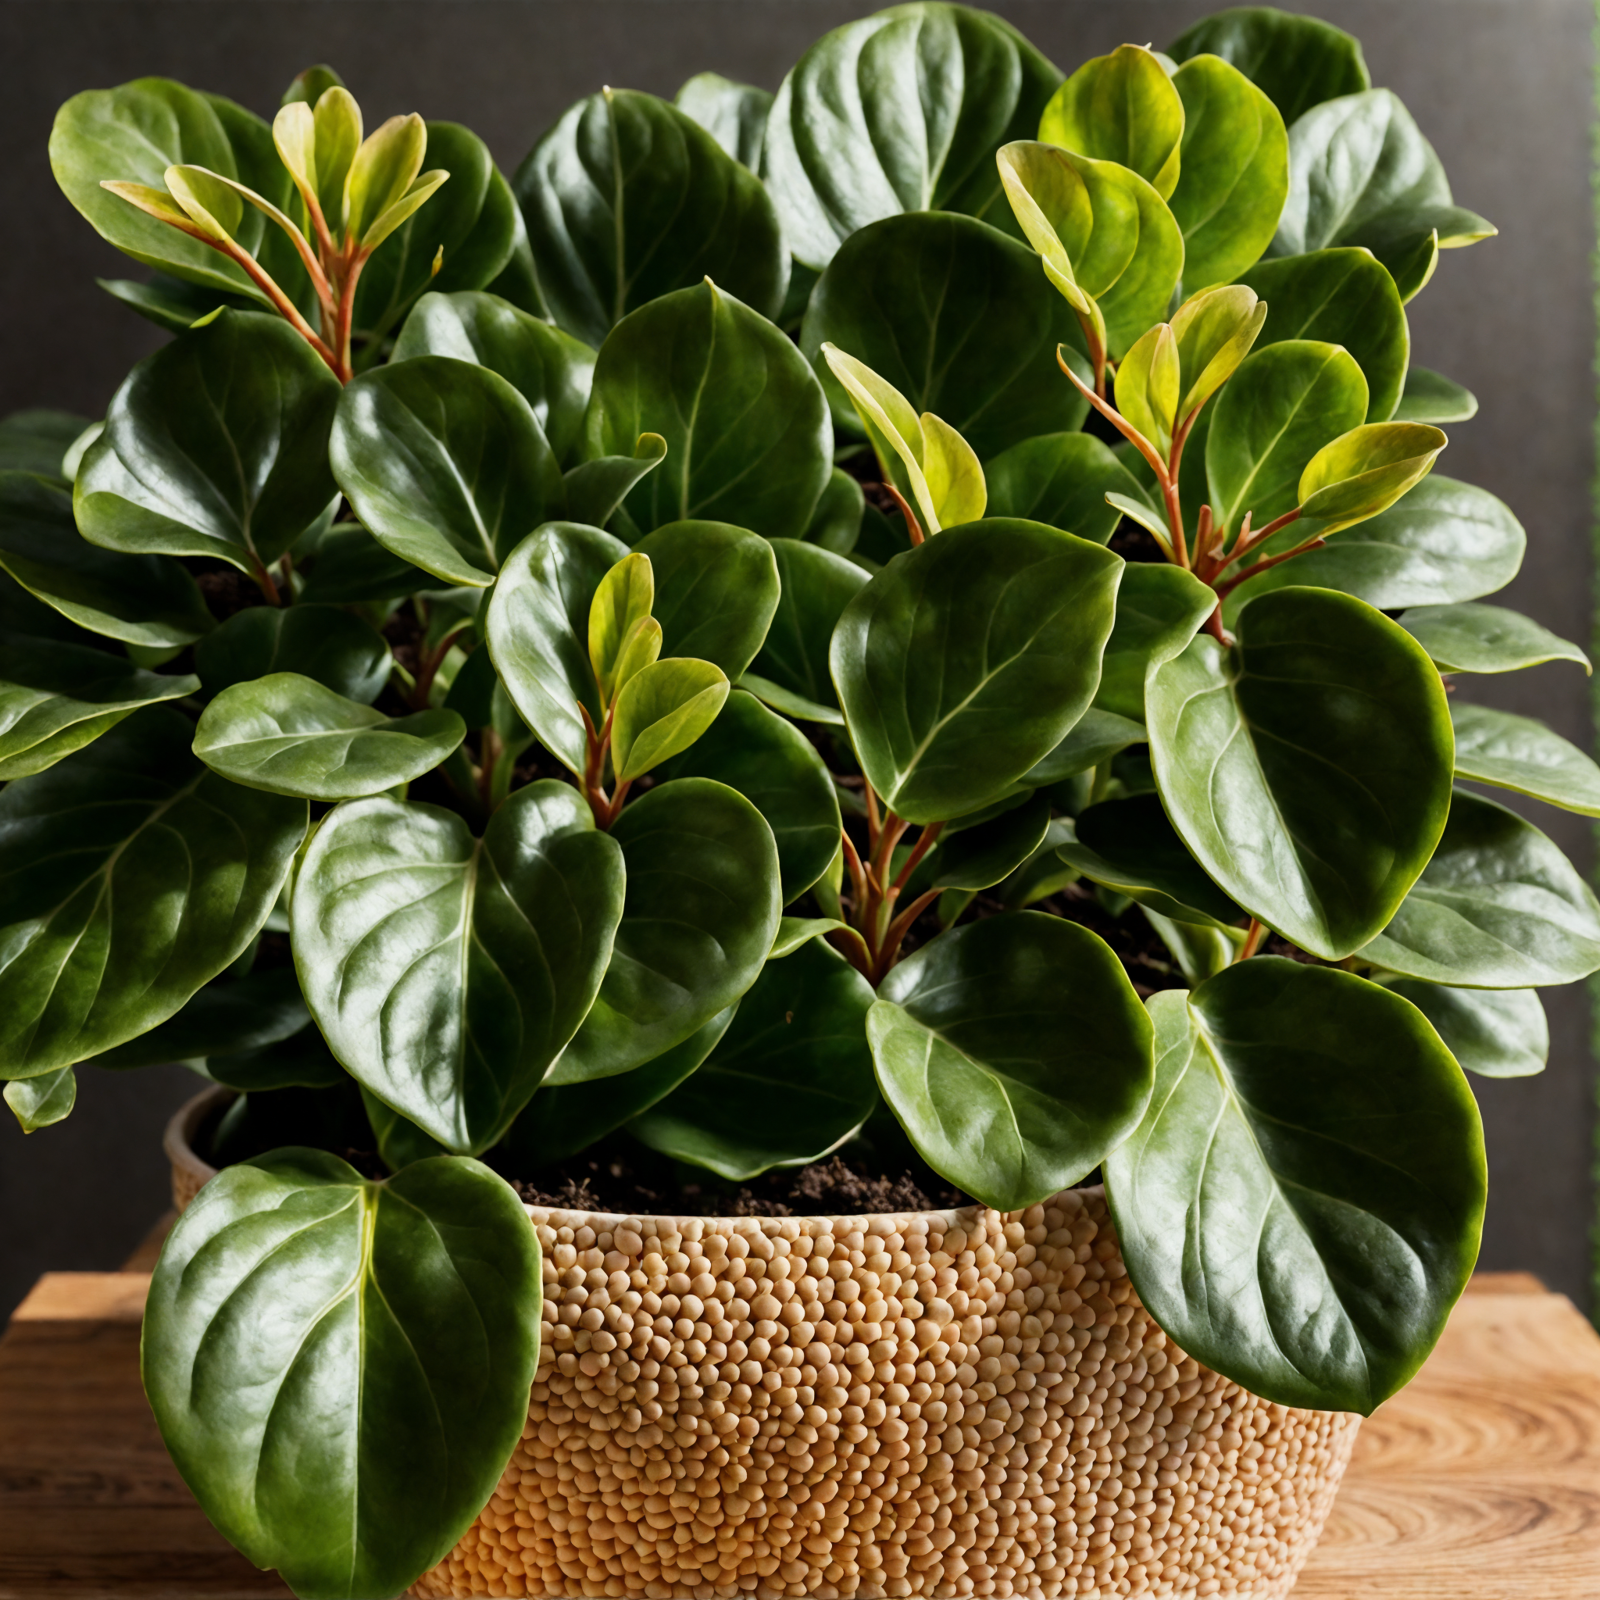 Peperomia obtusifolia in a bowl planter on a wooden table, with clear lighting and a dark background.